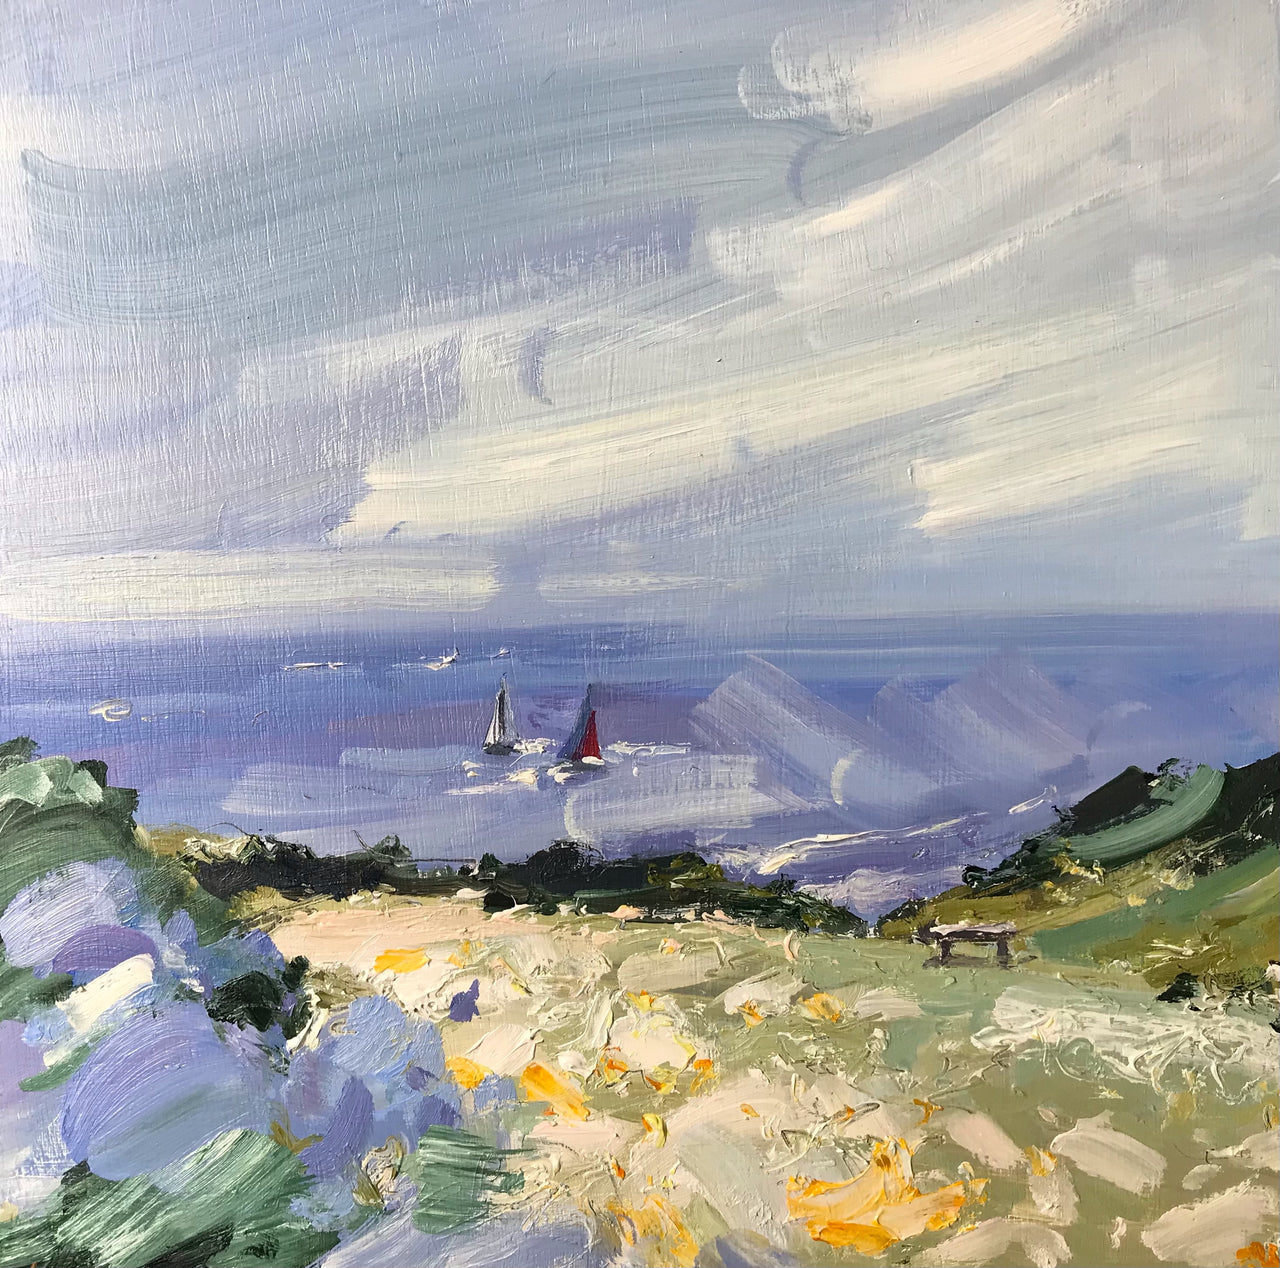 Seascape by artist Jill Hudson of boats sailing in the background and coastal landscape in foreground